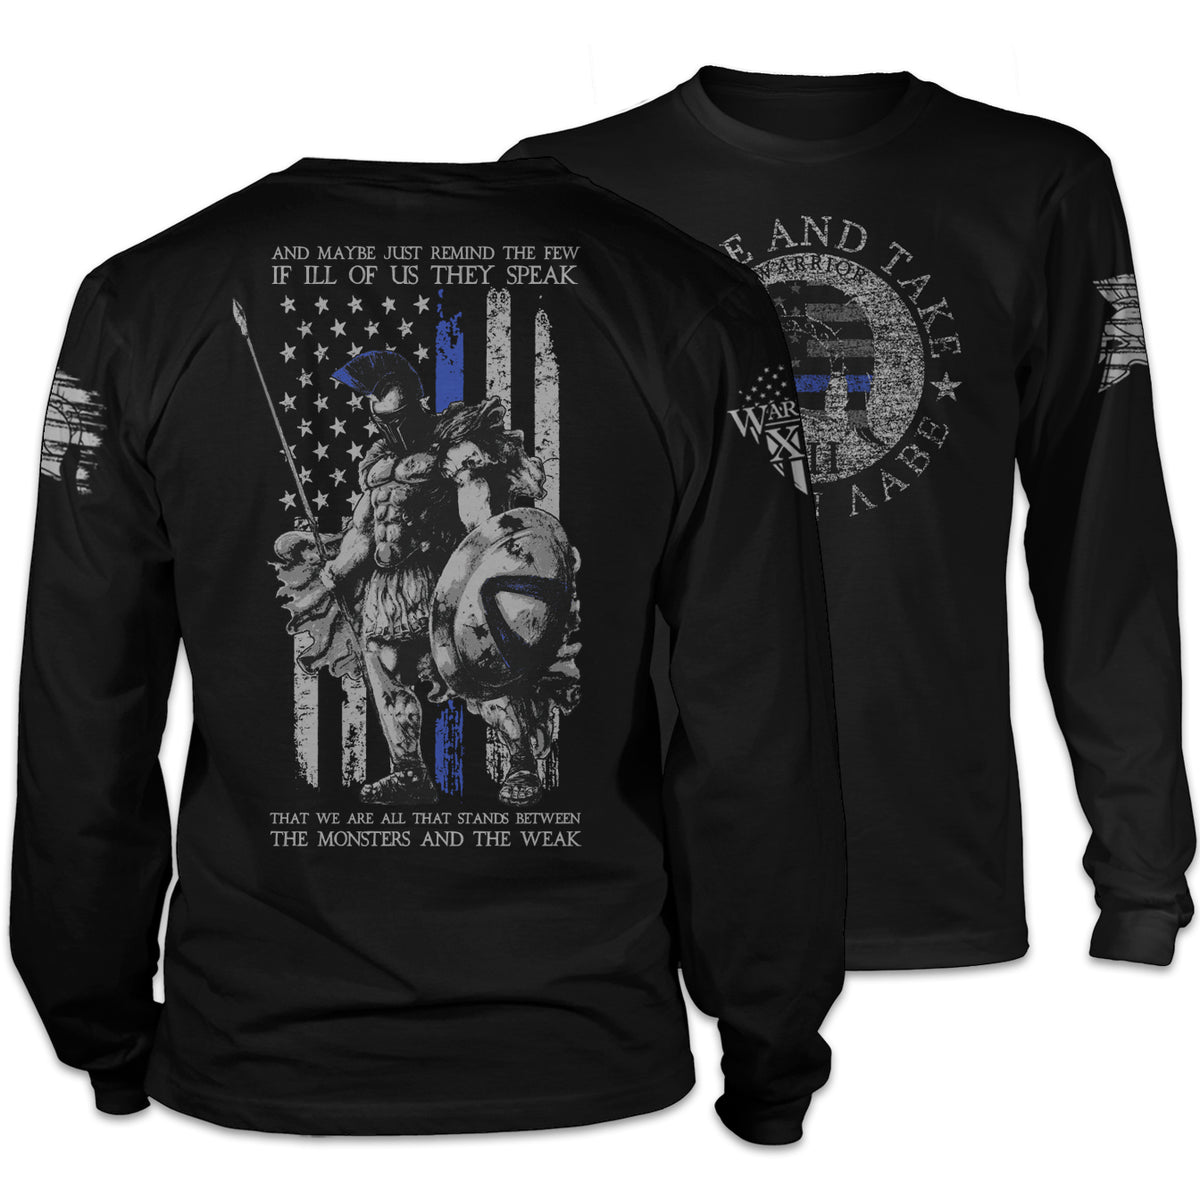 Front & back black Long sleeve shirt with an "American Spartan" thin blue line printed on the shirt.